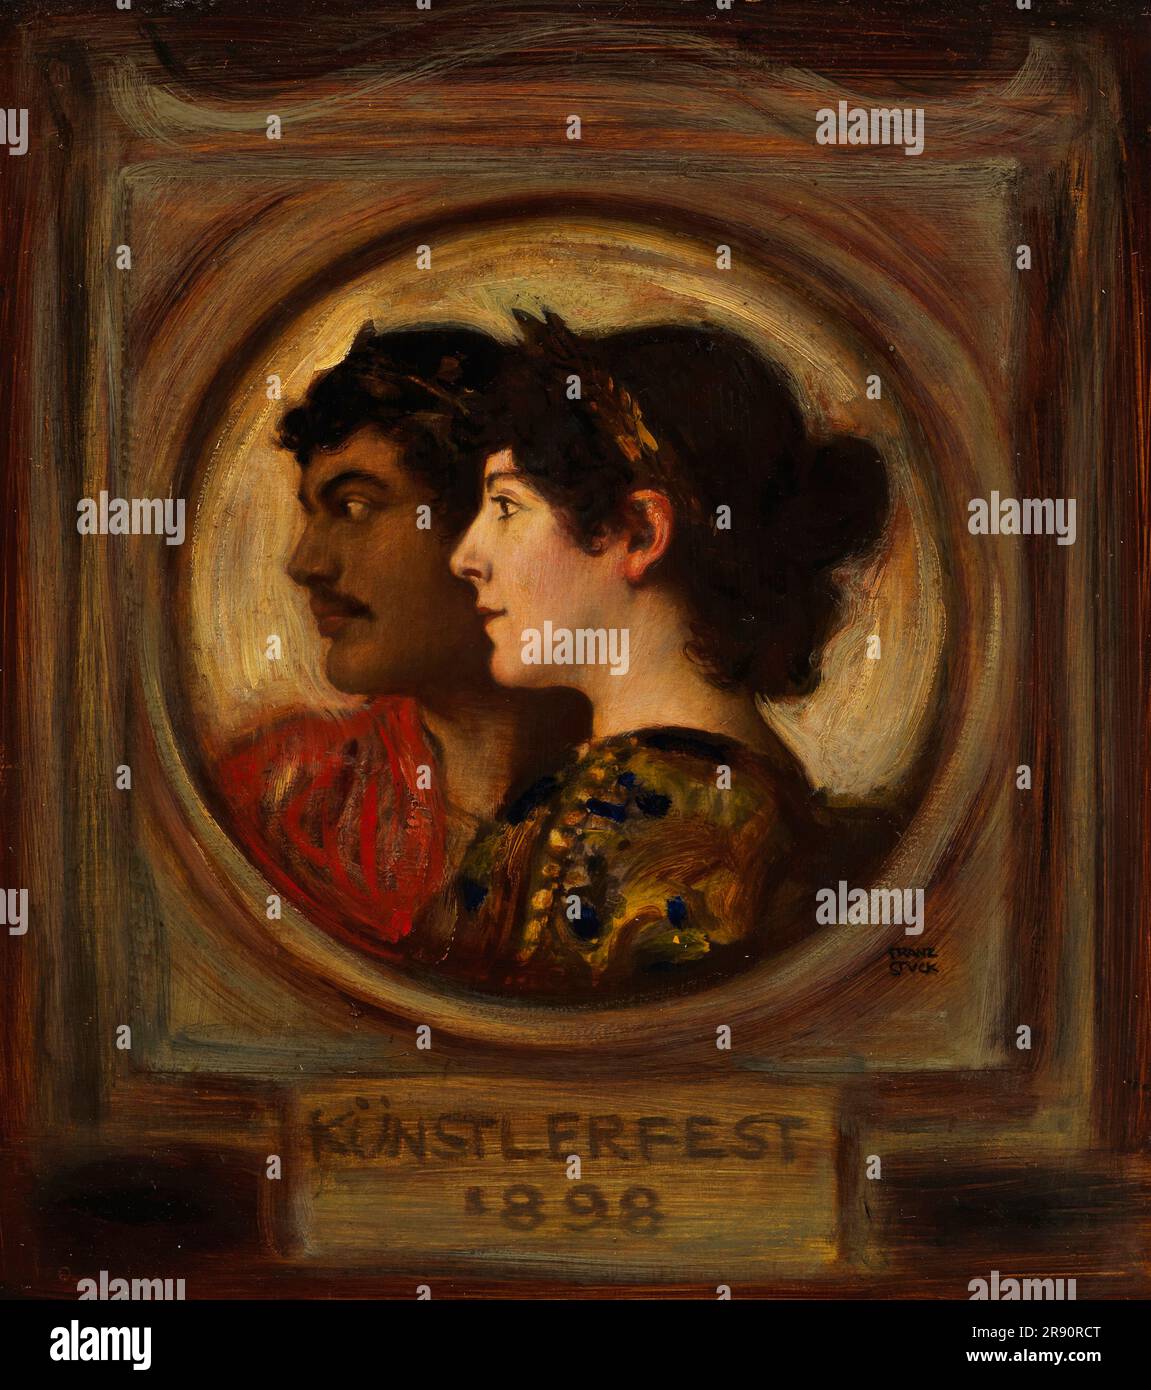 Franz and Mary Stuck - Artist Festival, 1898. Private Collection. Stock Photo